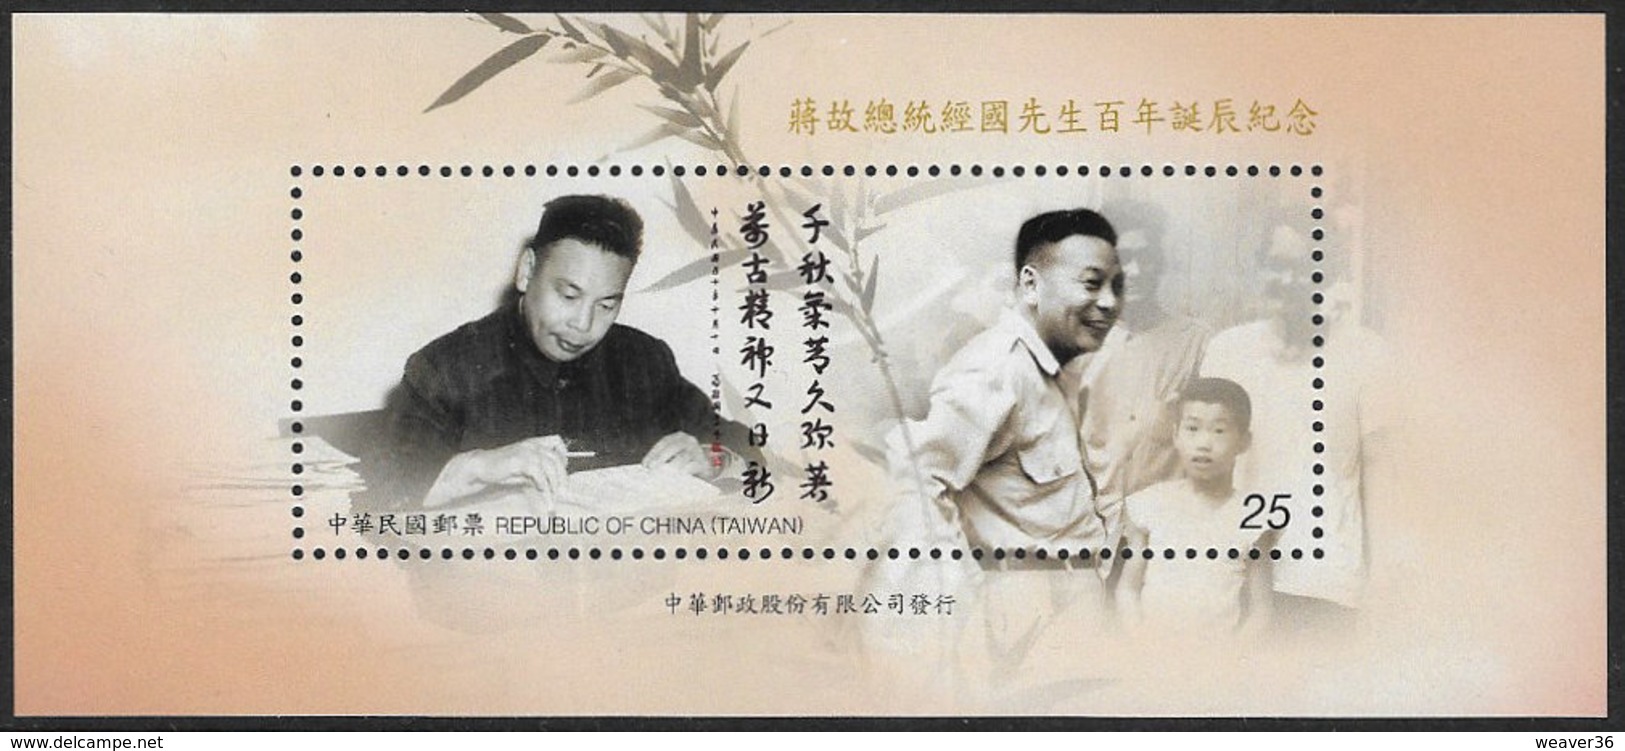 China (Taiwan) 2009 Chiang Ching-kuo Souvenir Sheet Unmounted Mint [4/4185/ND] - Unused Stamps